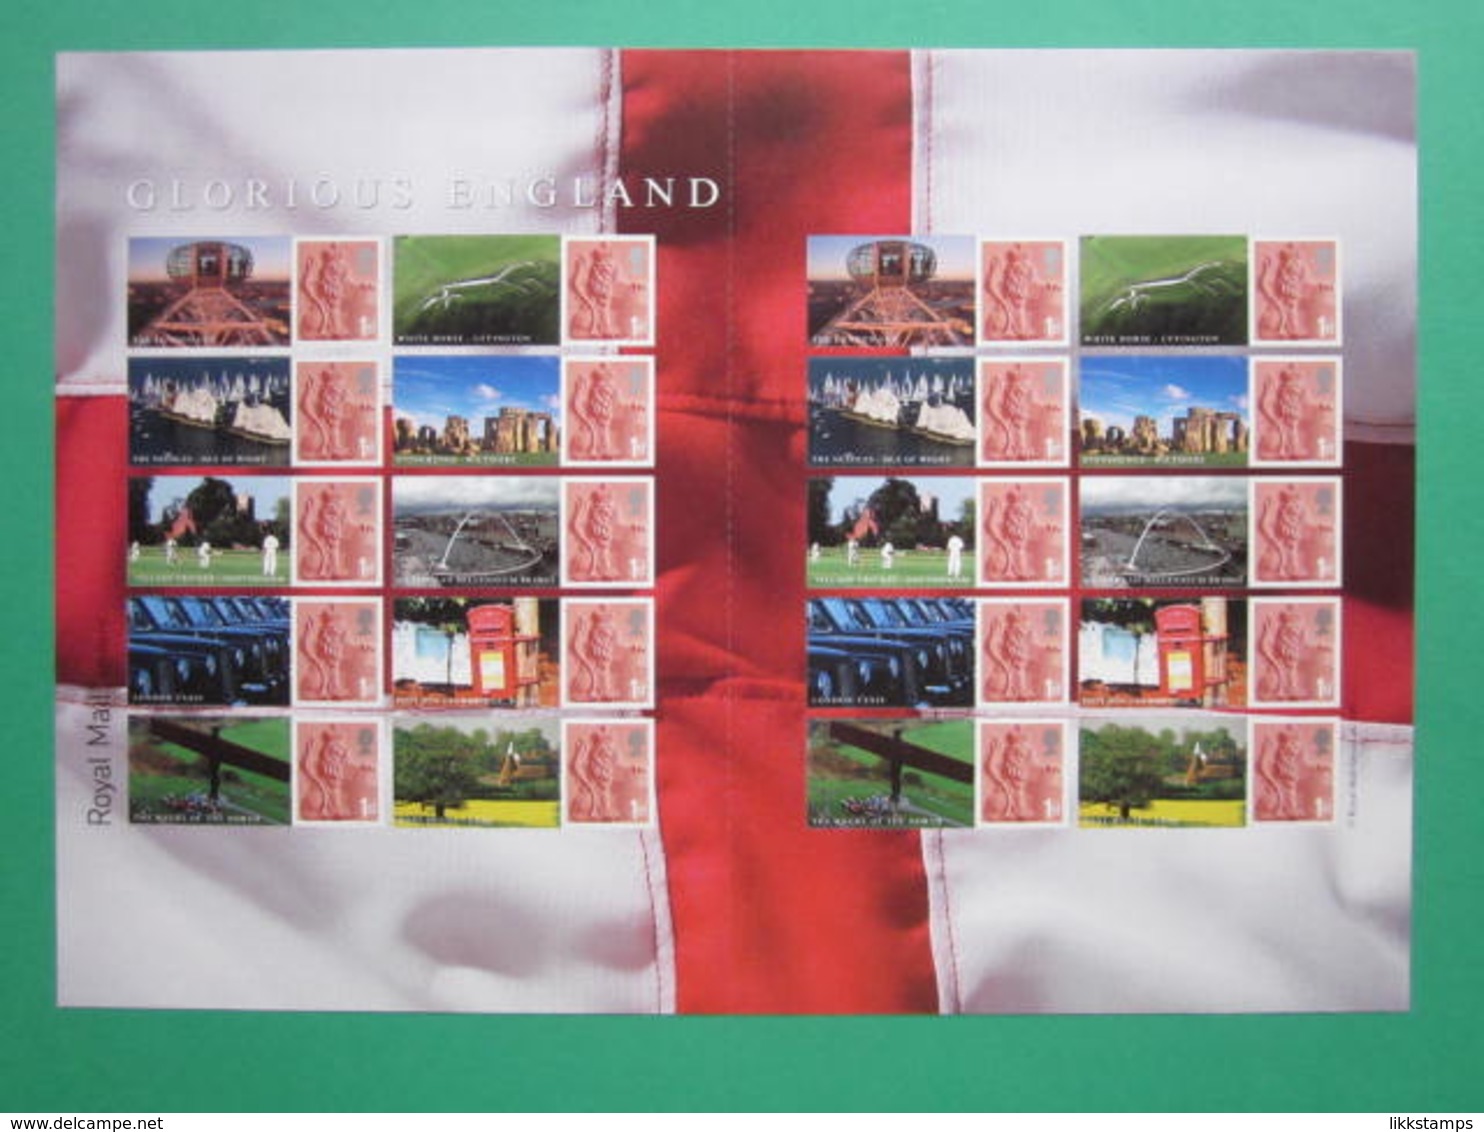 2007 ROYAL MAIL GLORIOUS ENGLAND GENERIC SMILERS SHEET. #SS0041 - Smilers Sheets